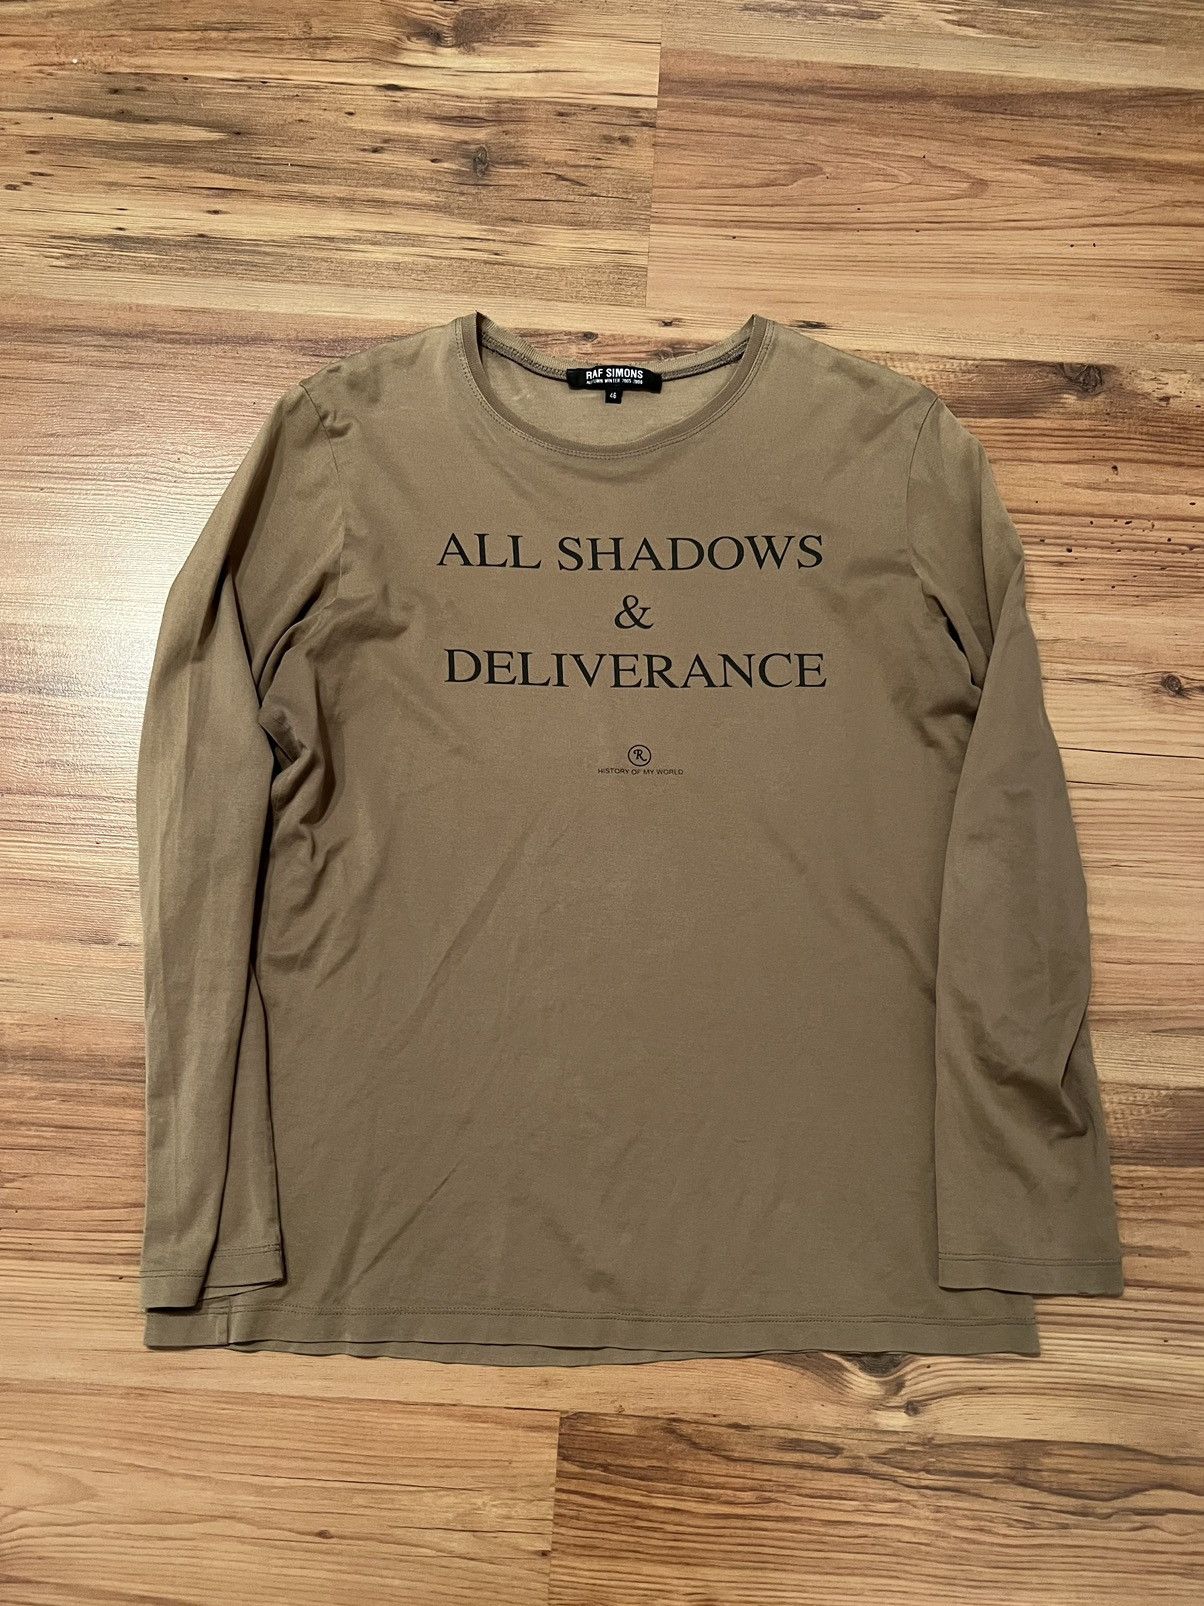 Raf Simons AW/05-06 All shadows and deliverance top | Grailed